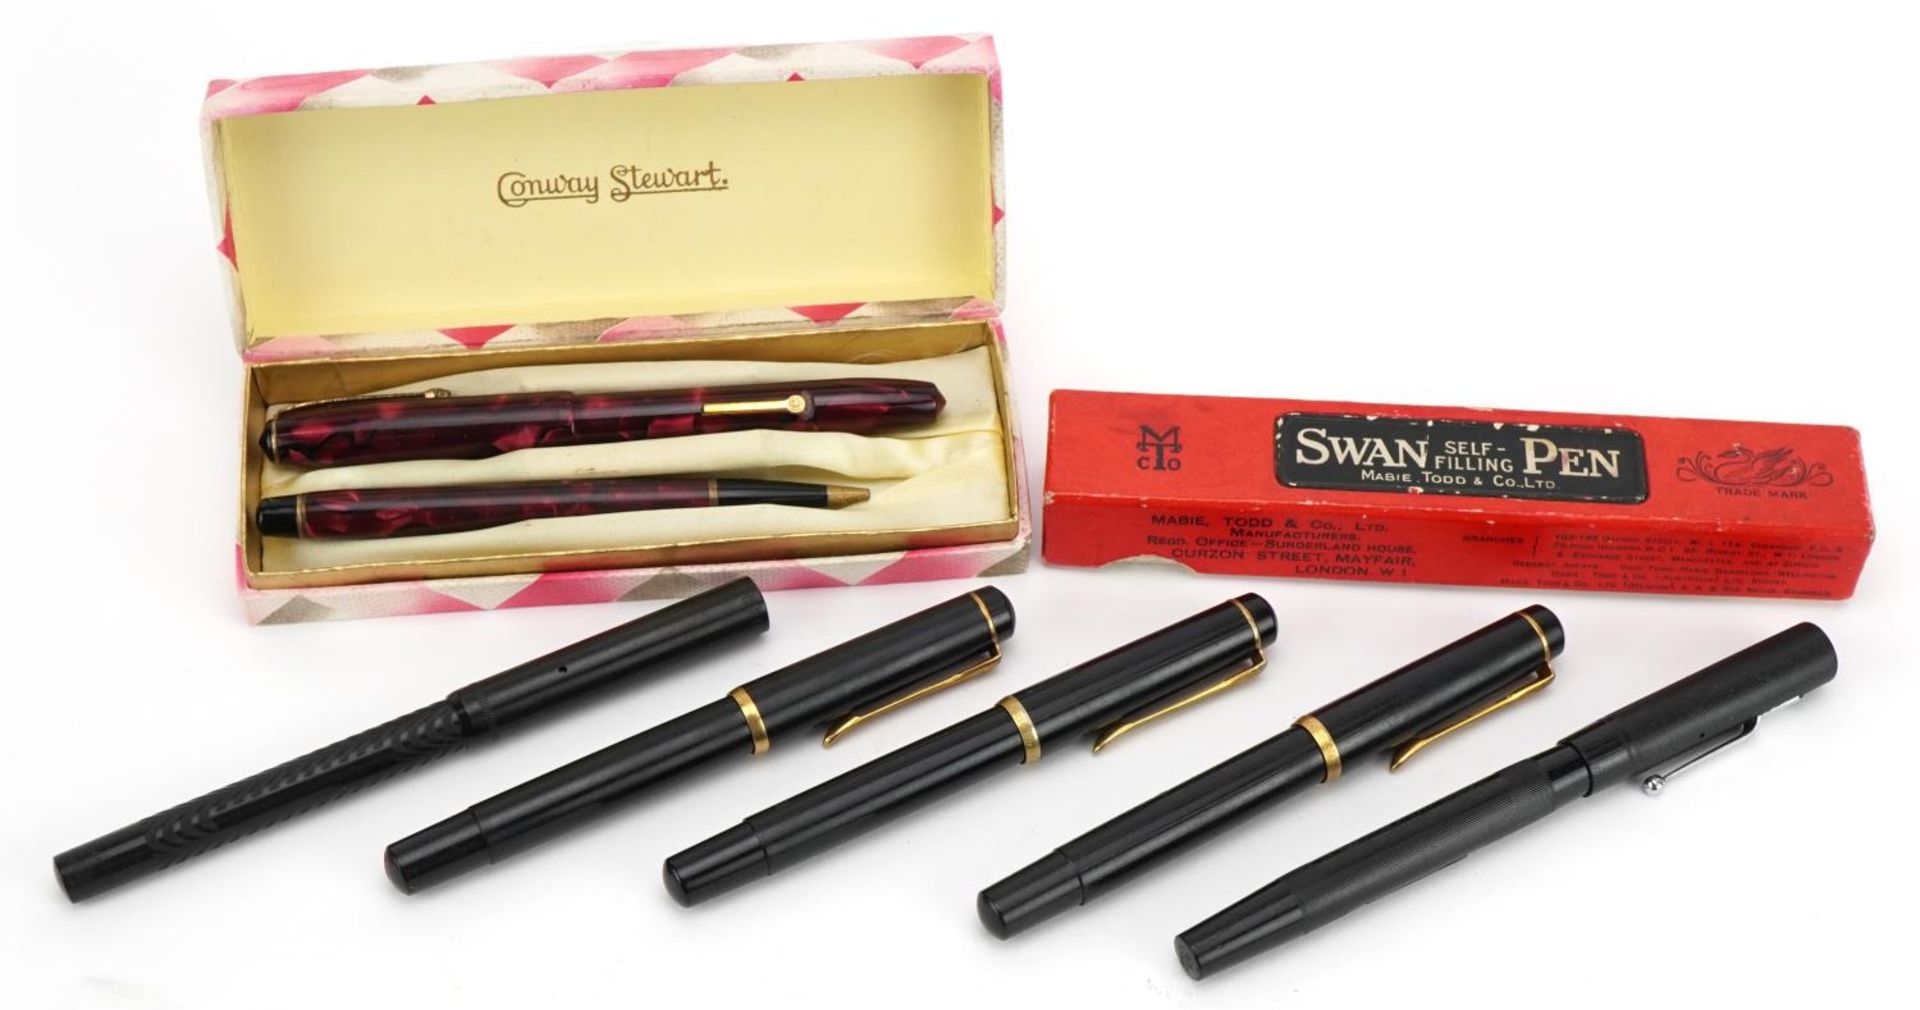 Vintage fountain pens and ballpoint pens including Swan Minor, Blackbird Fountpen and Conway Stewart